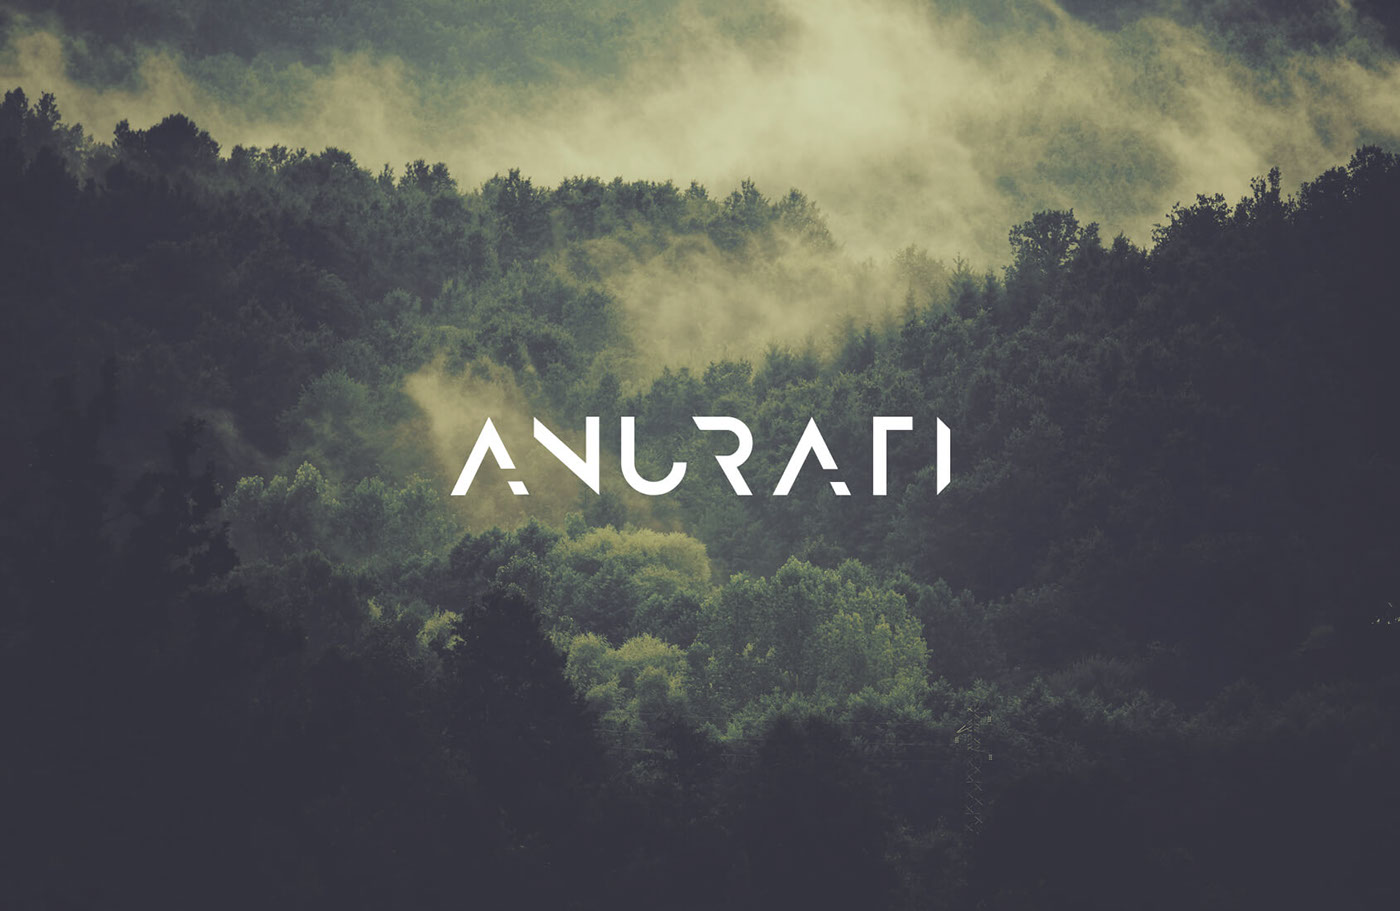 anurati Free font commercial use typo free download fontographer Free to use graphism design logos modulable Illustrator futur minimalist free fonts